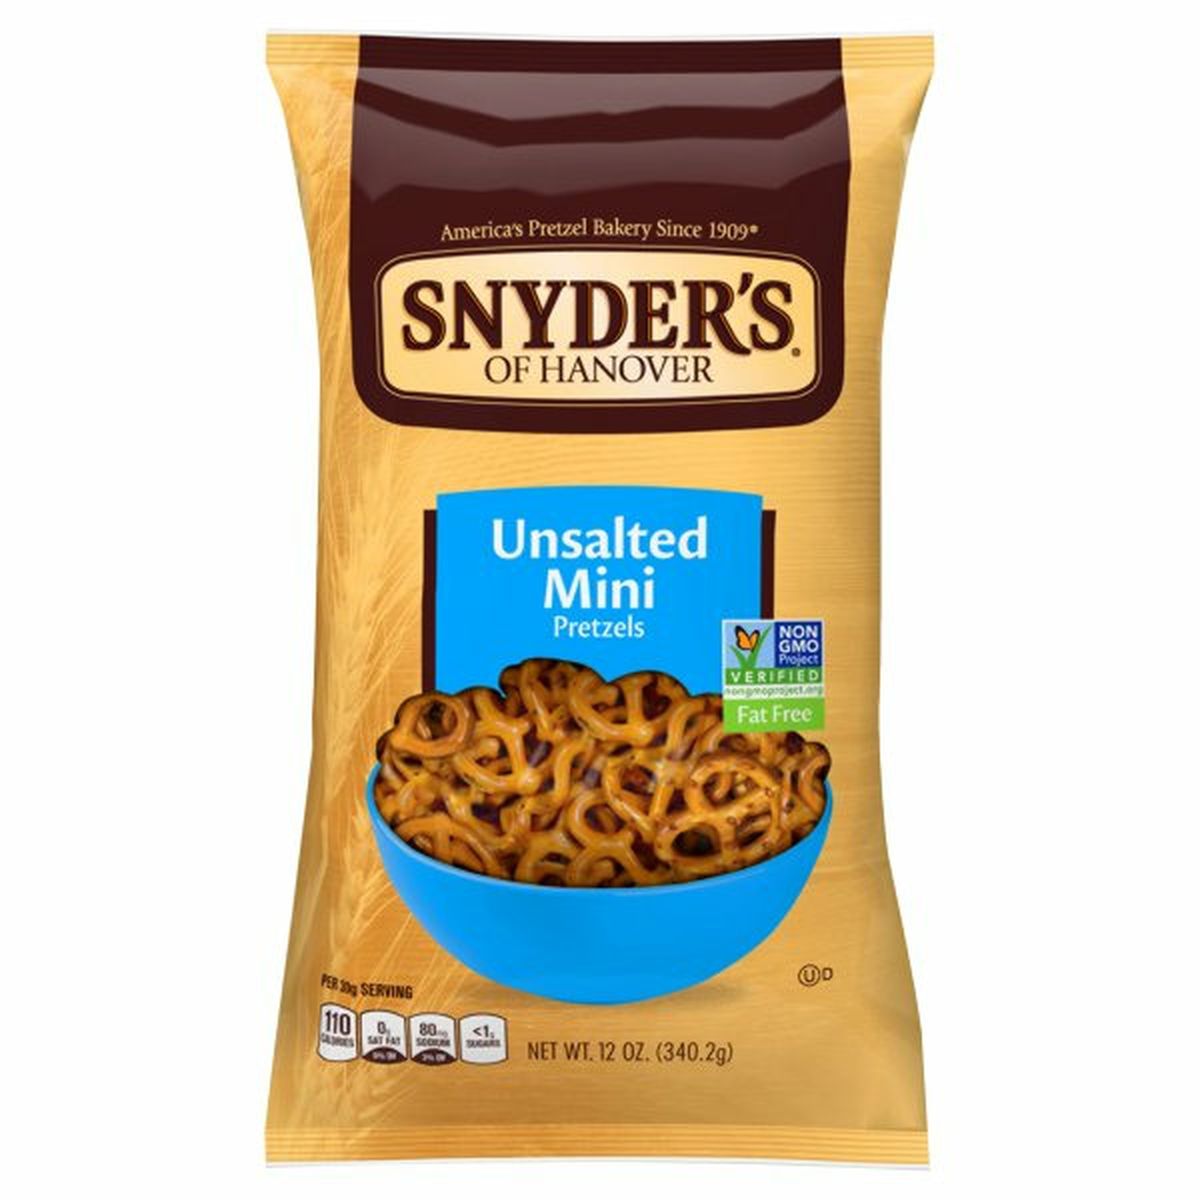 Calories in Snyder's of Hanovers Pretzels, Unsalted, Mini